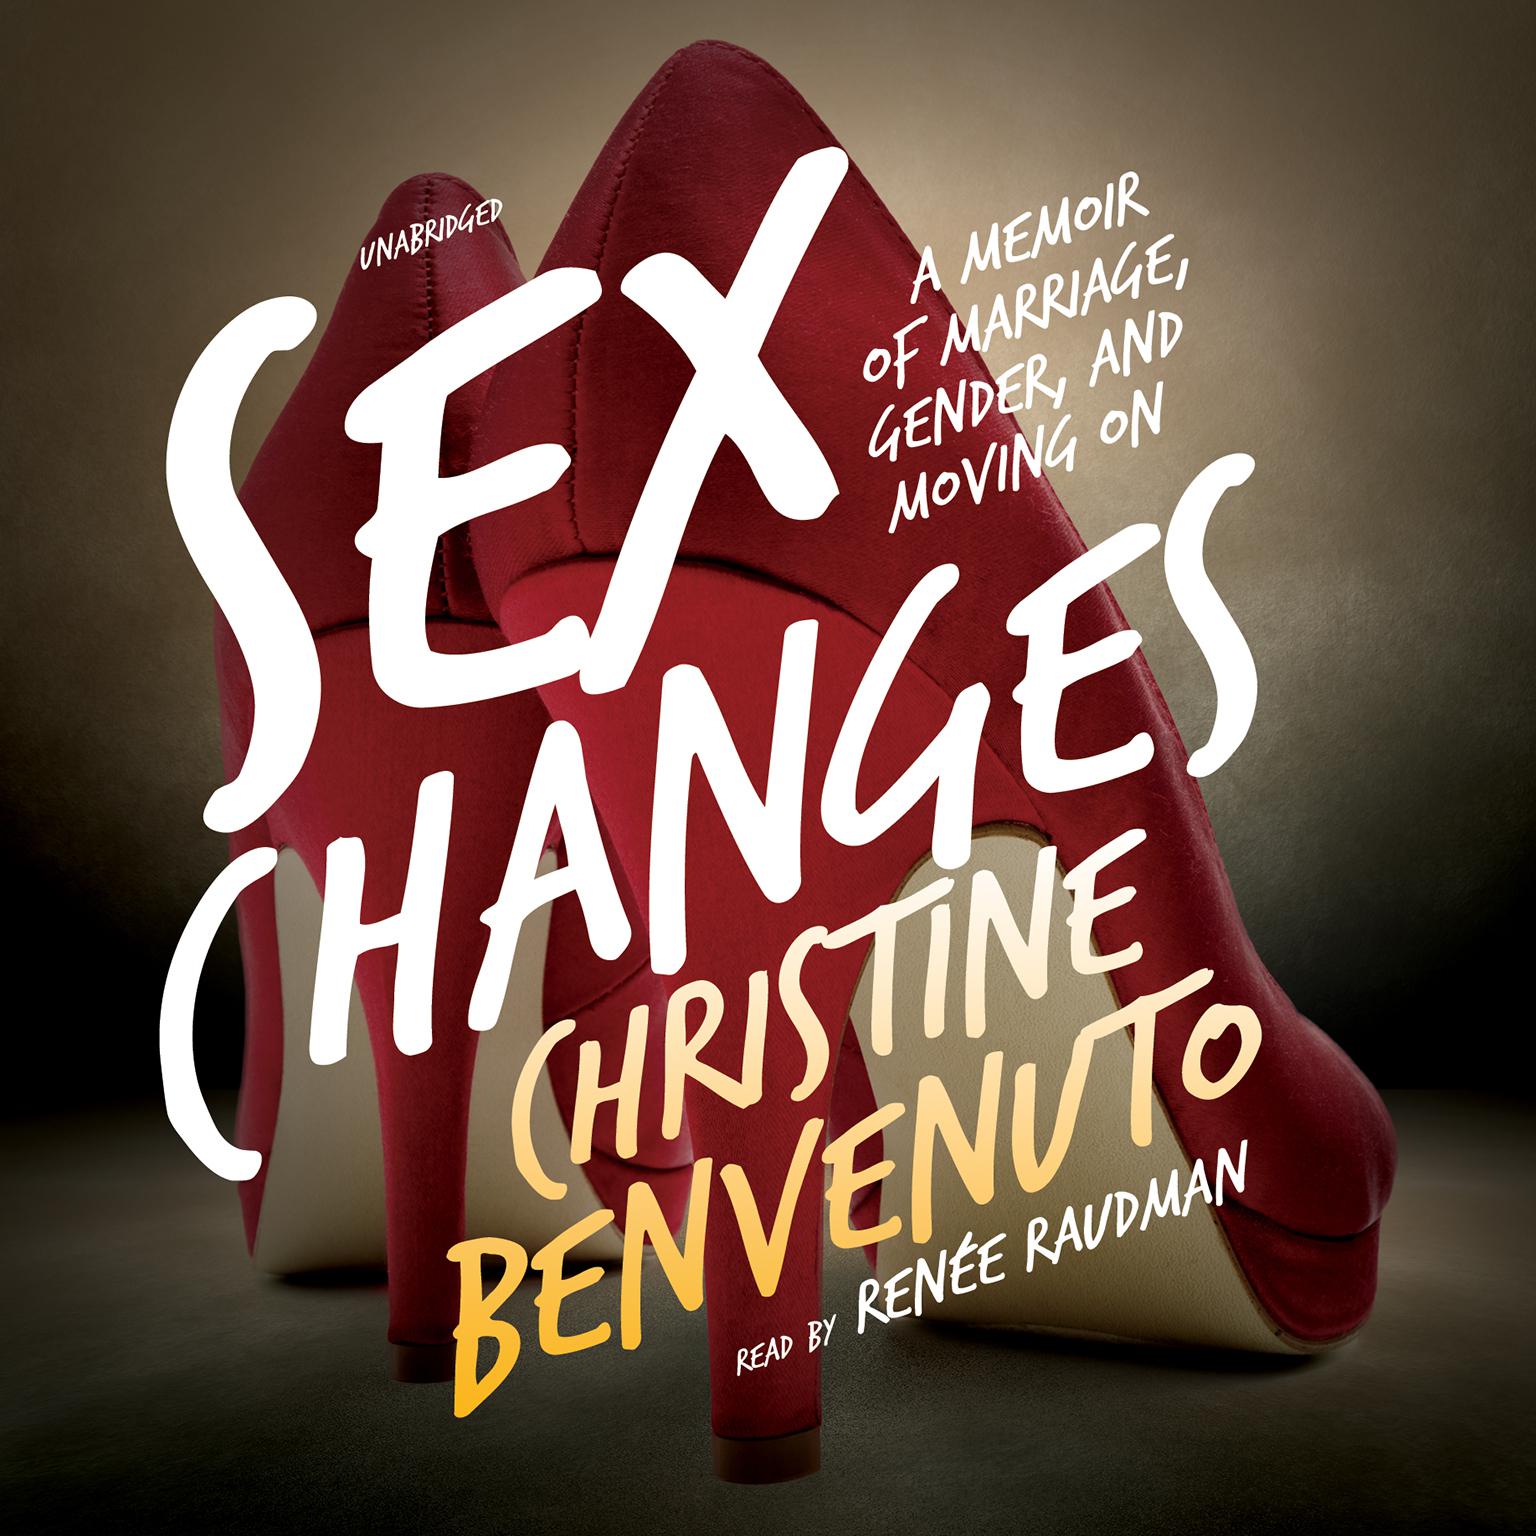 Sex Changes: A Memoir of Marriage, Gender, and Moving On Audiobook, by Christine Benvenuto